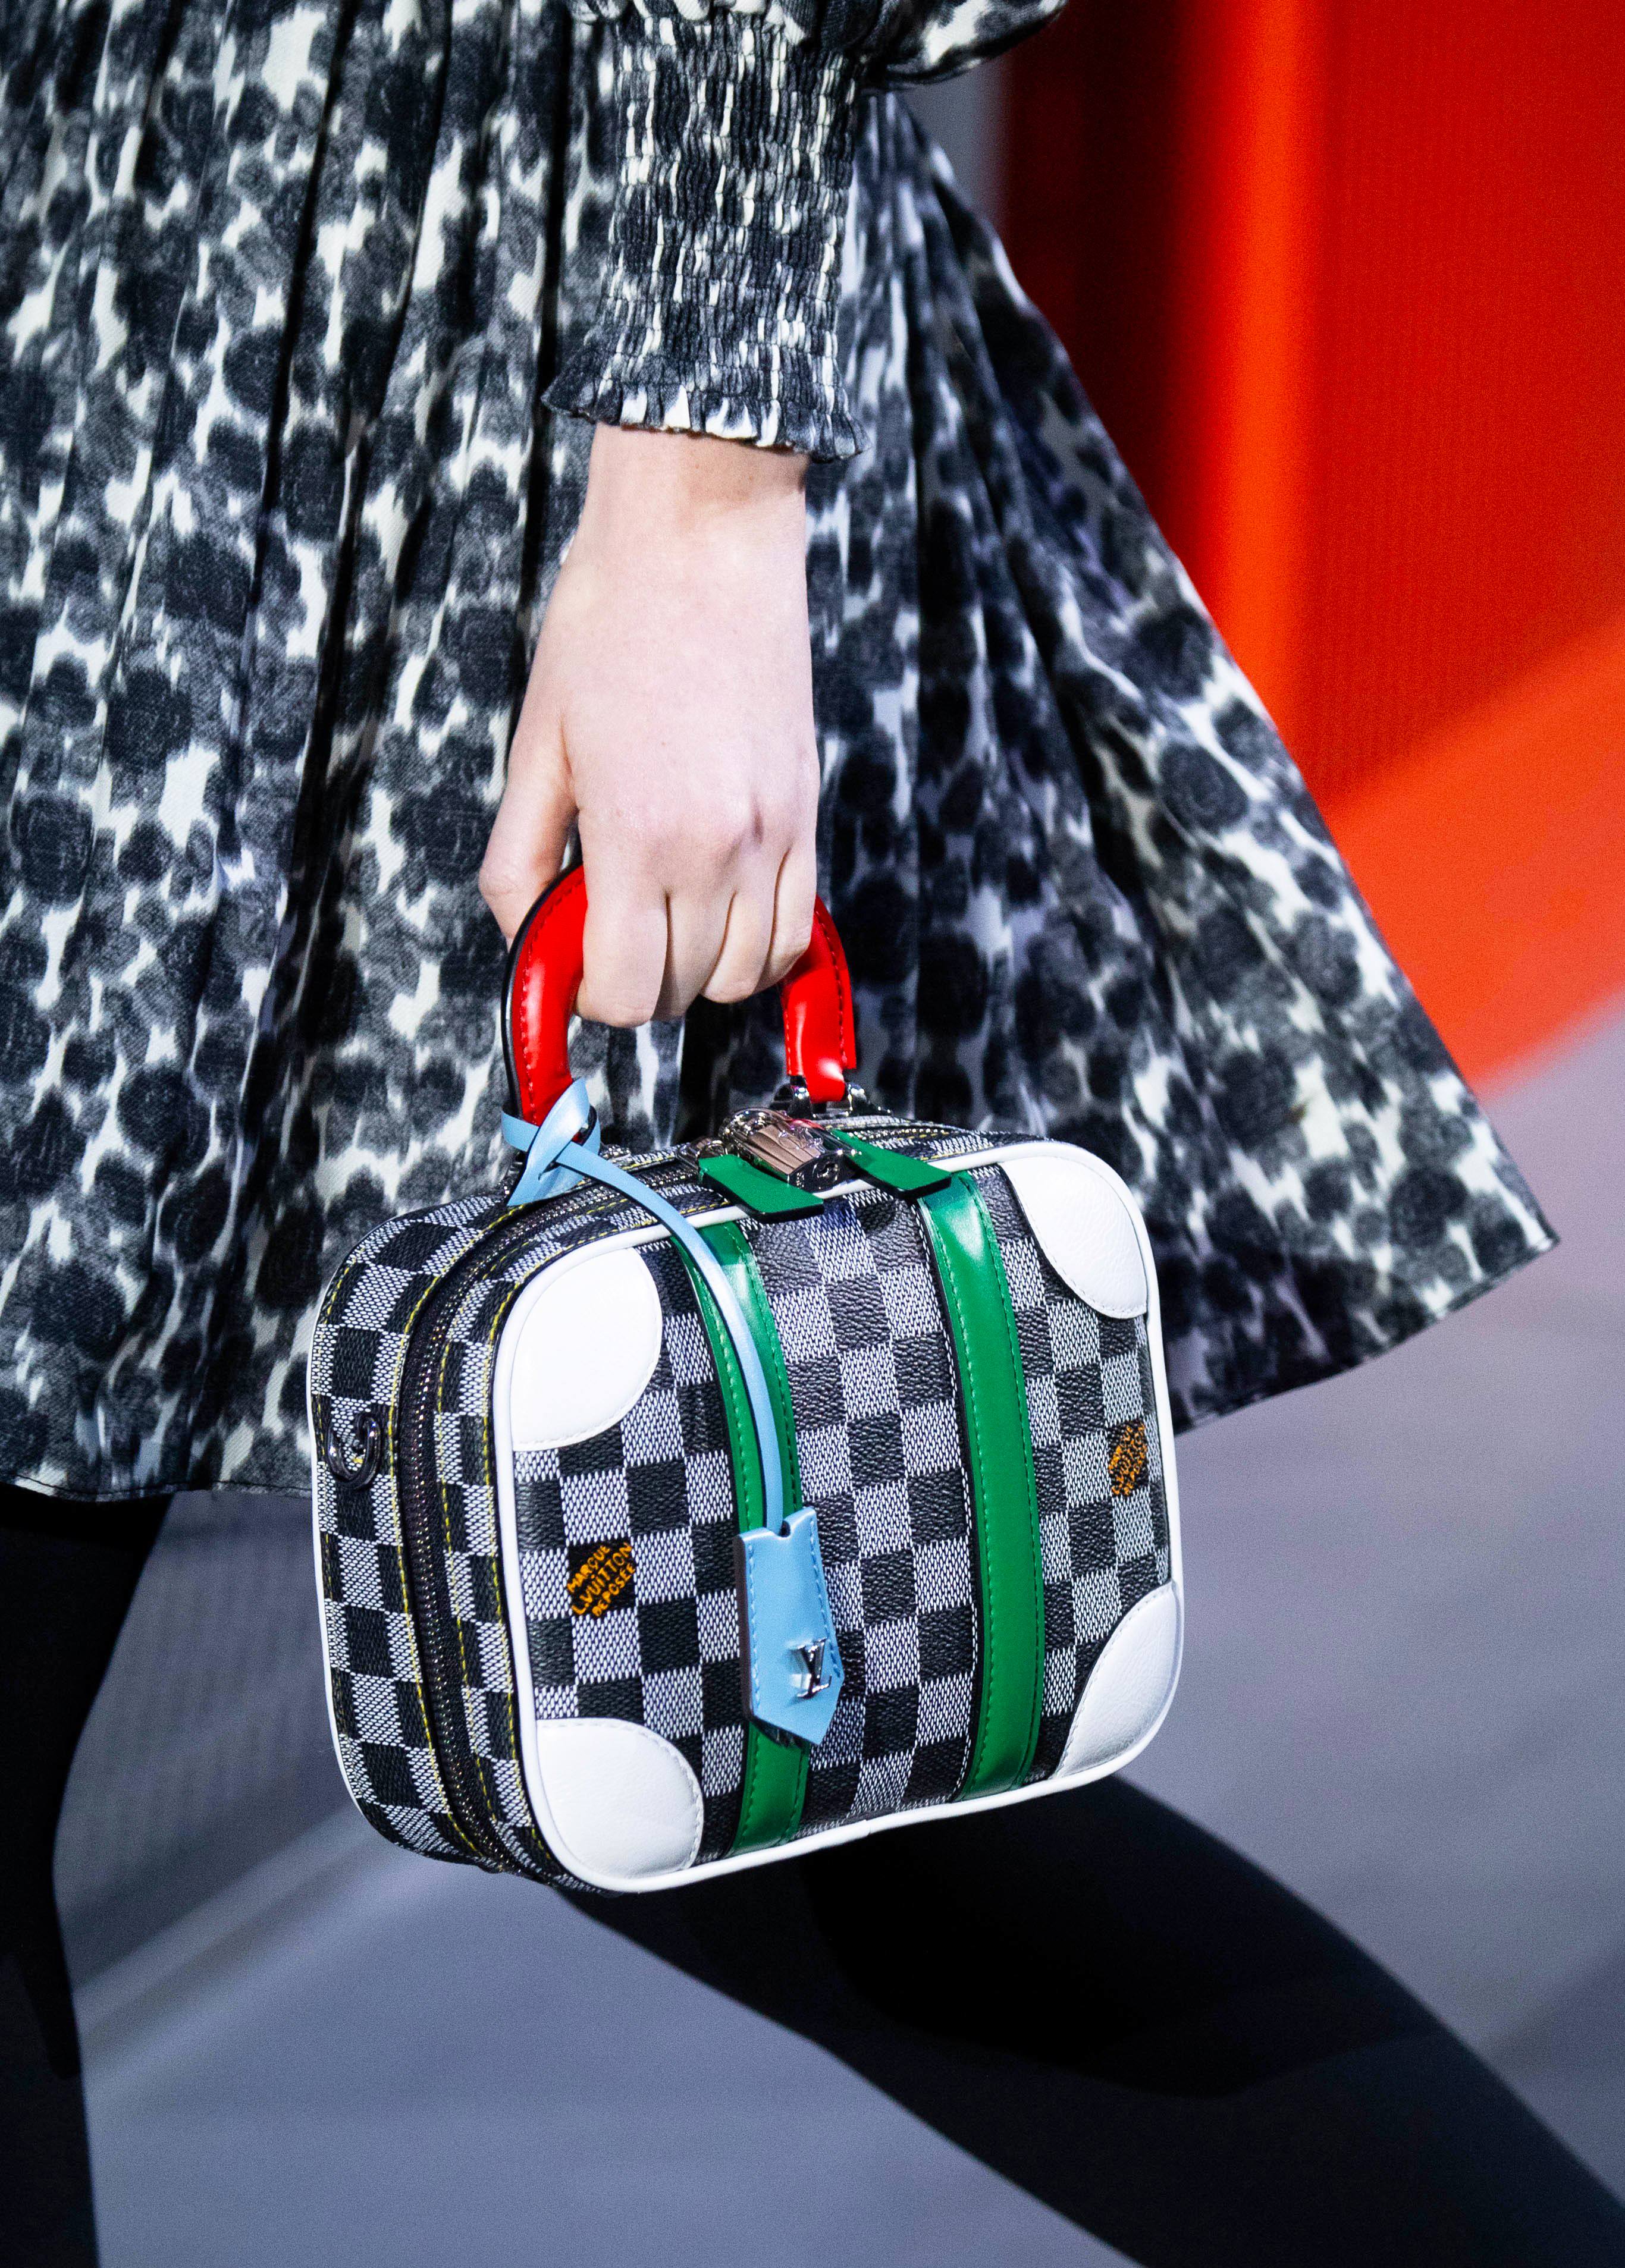 Louis Vuitton Mini Luggage BB handbag from the Fall 2019 Runway Collection